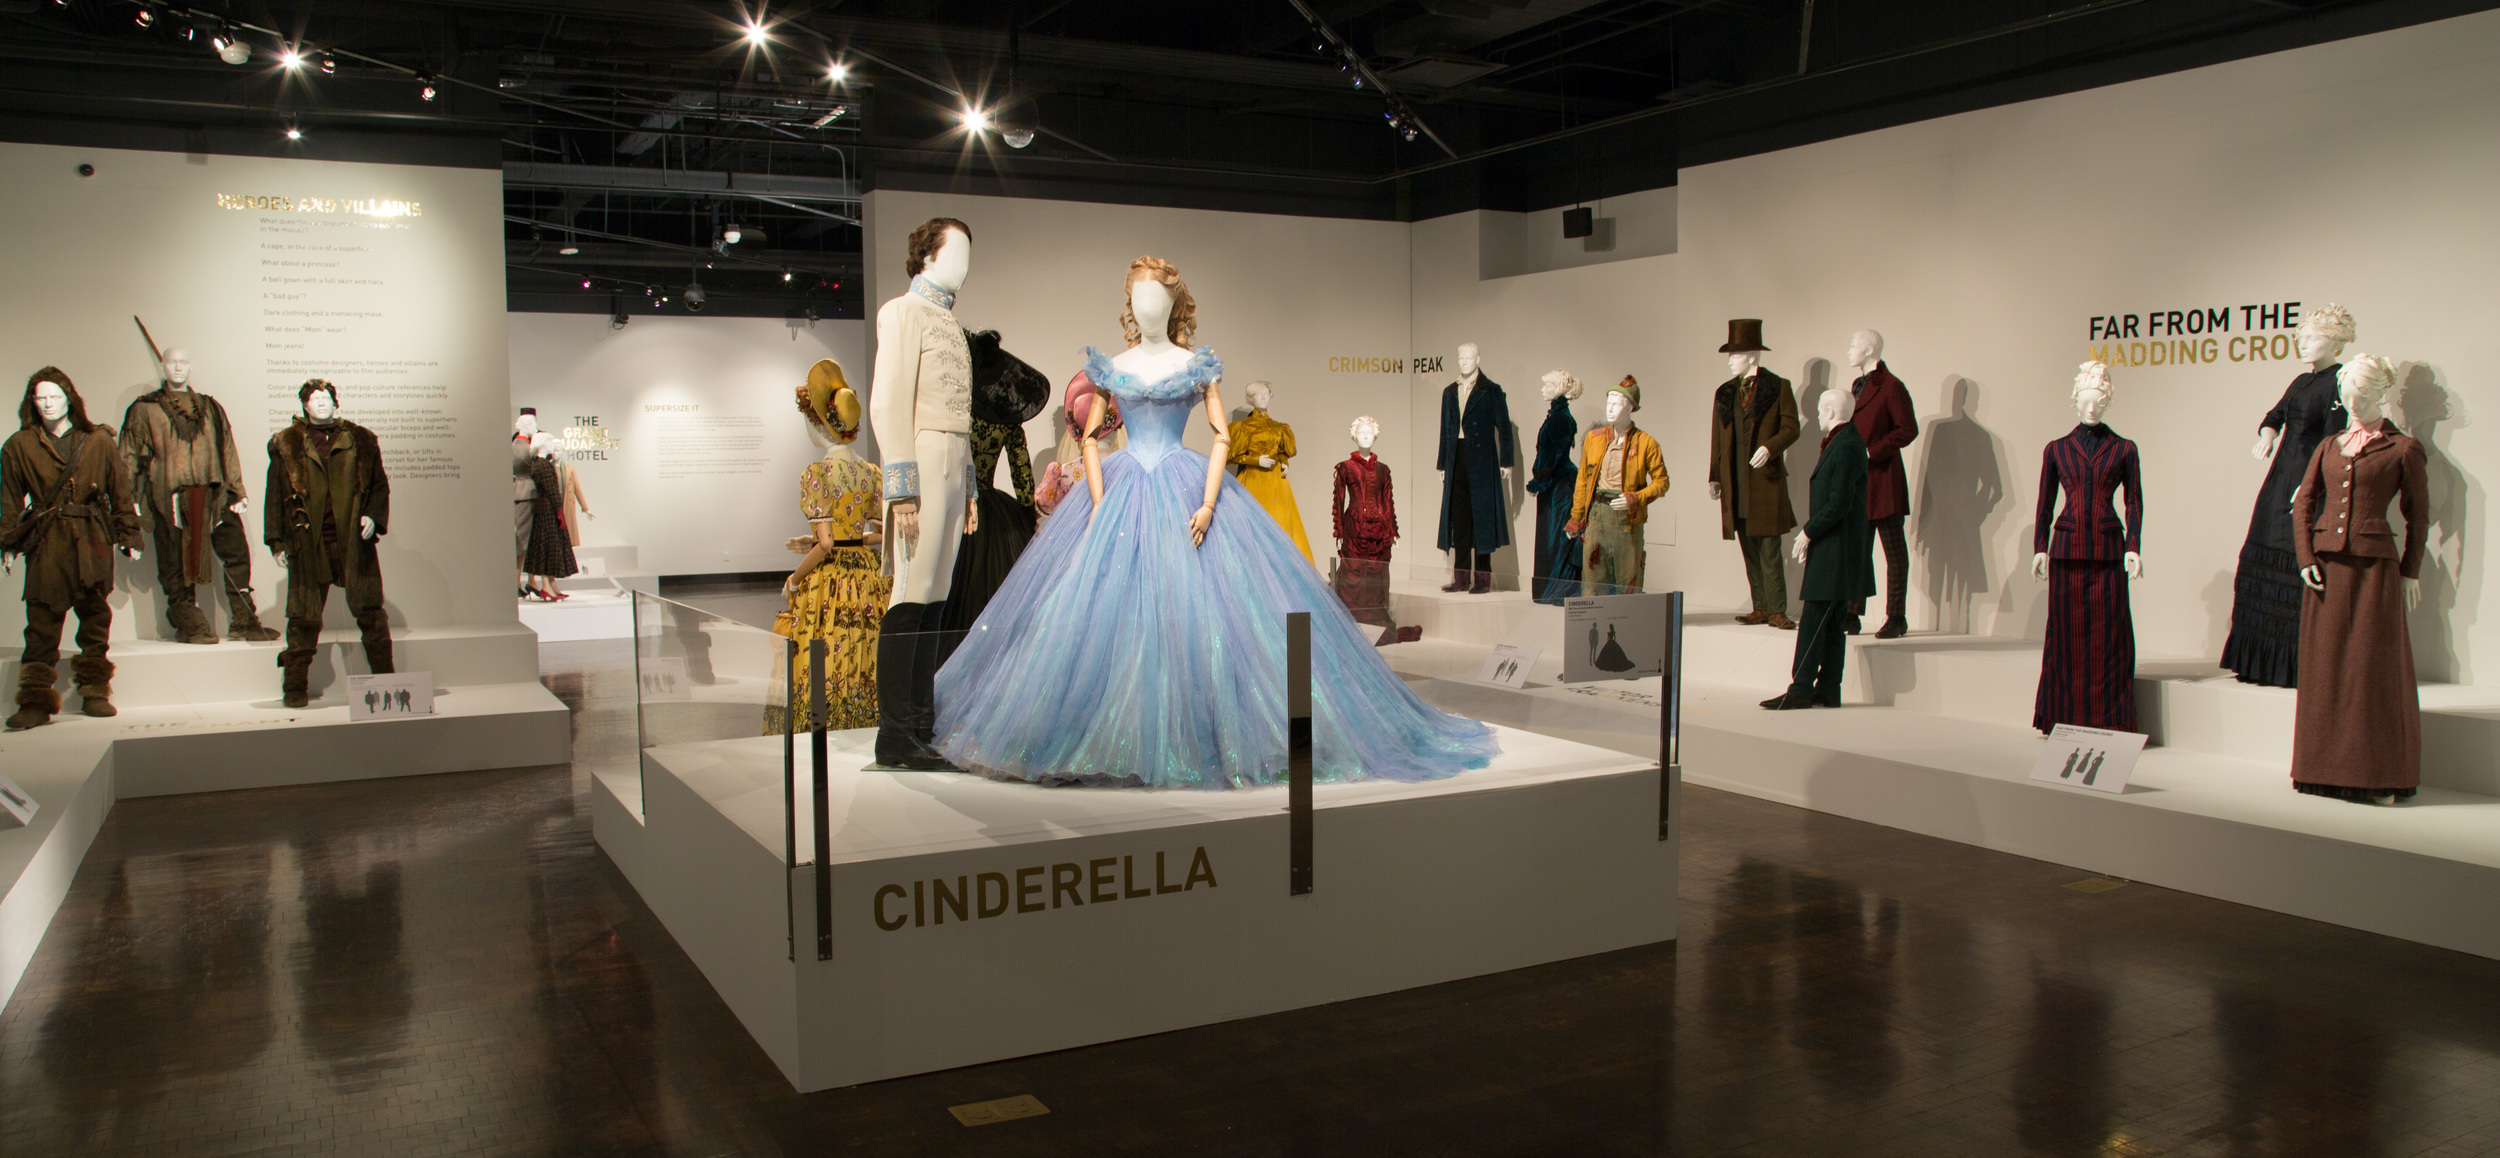  A view of the 24th Annual "Art of Motion Picture Costume Design" exhibition, FIDM Museum, Fashion Institute of Design &amp; Merchandising, Los Angeles. The exhibition is free to the public, Tuesday, February 9 through Saturday, April 30, 2016, 10:00